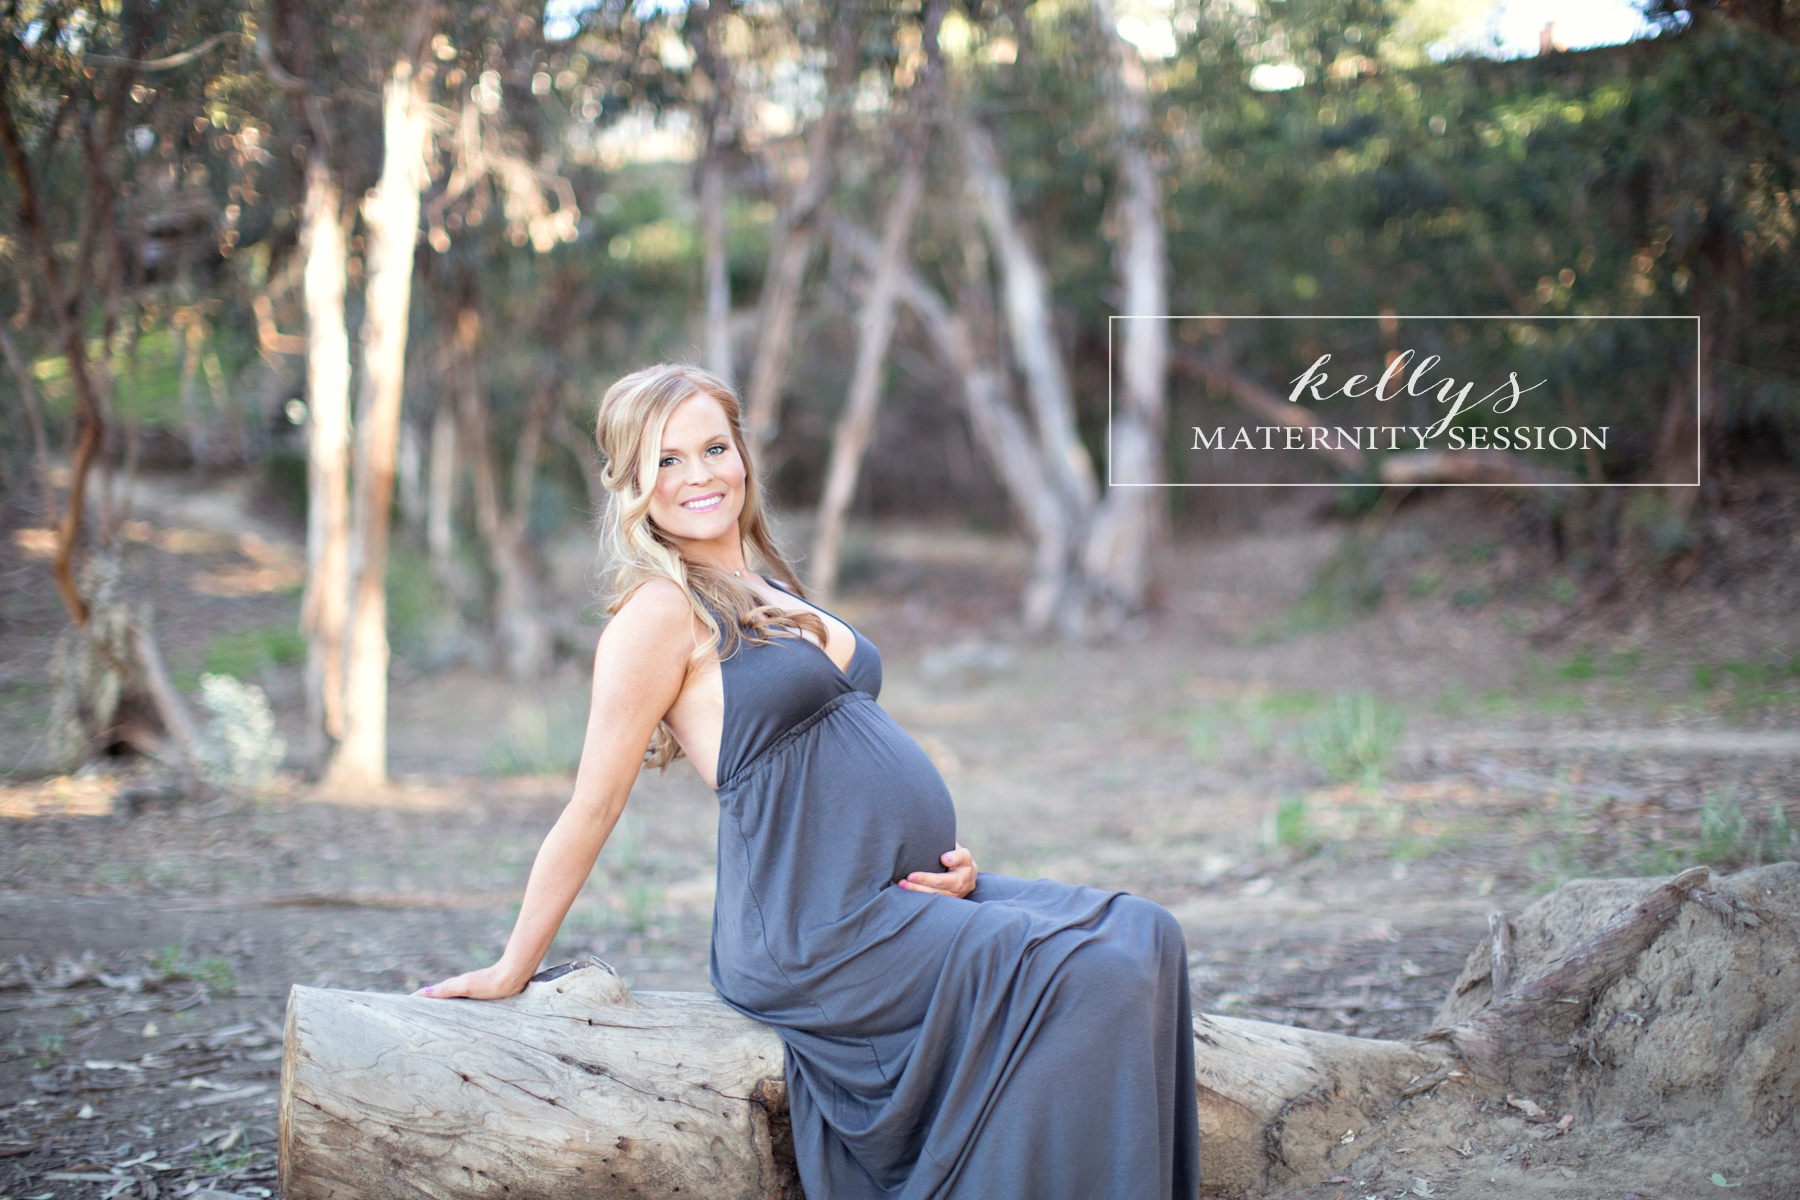 4.7.14_Kelly_MaternitySession_HighRes-4cover